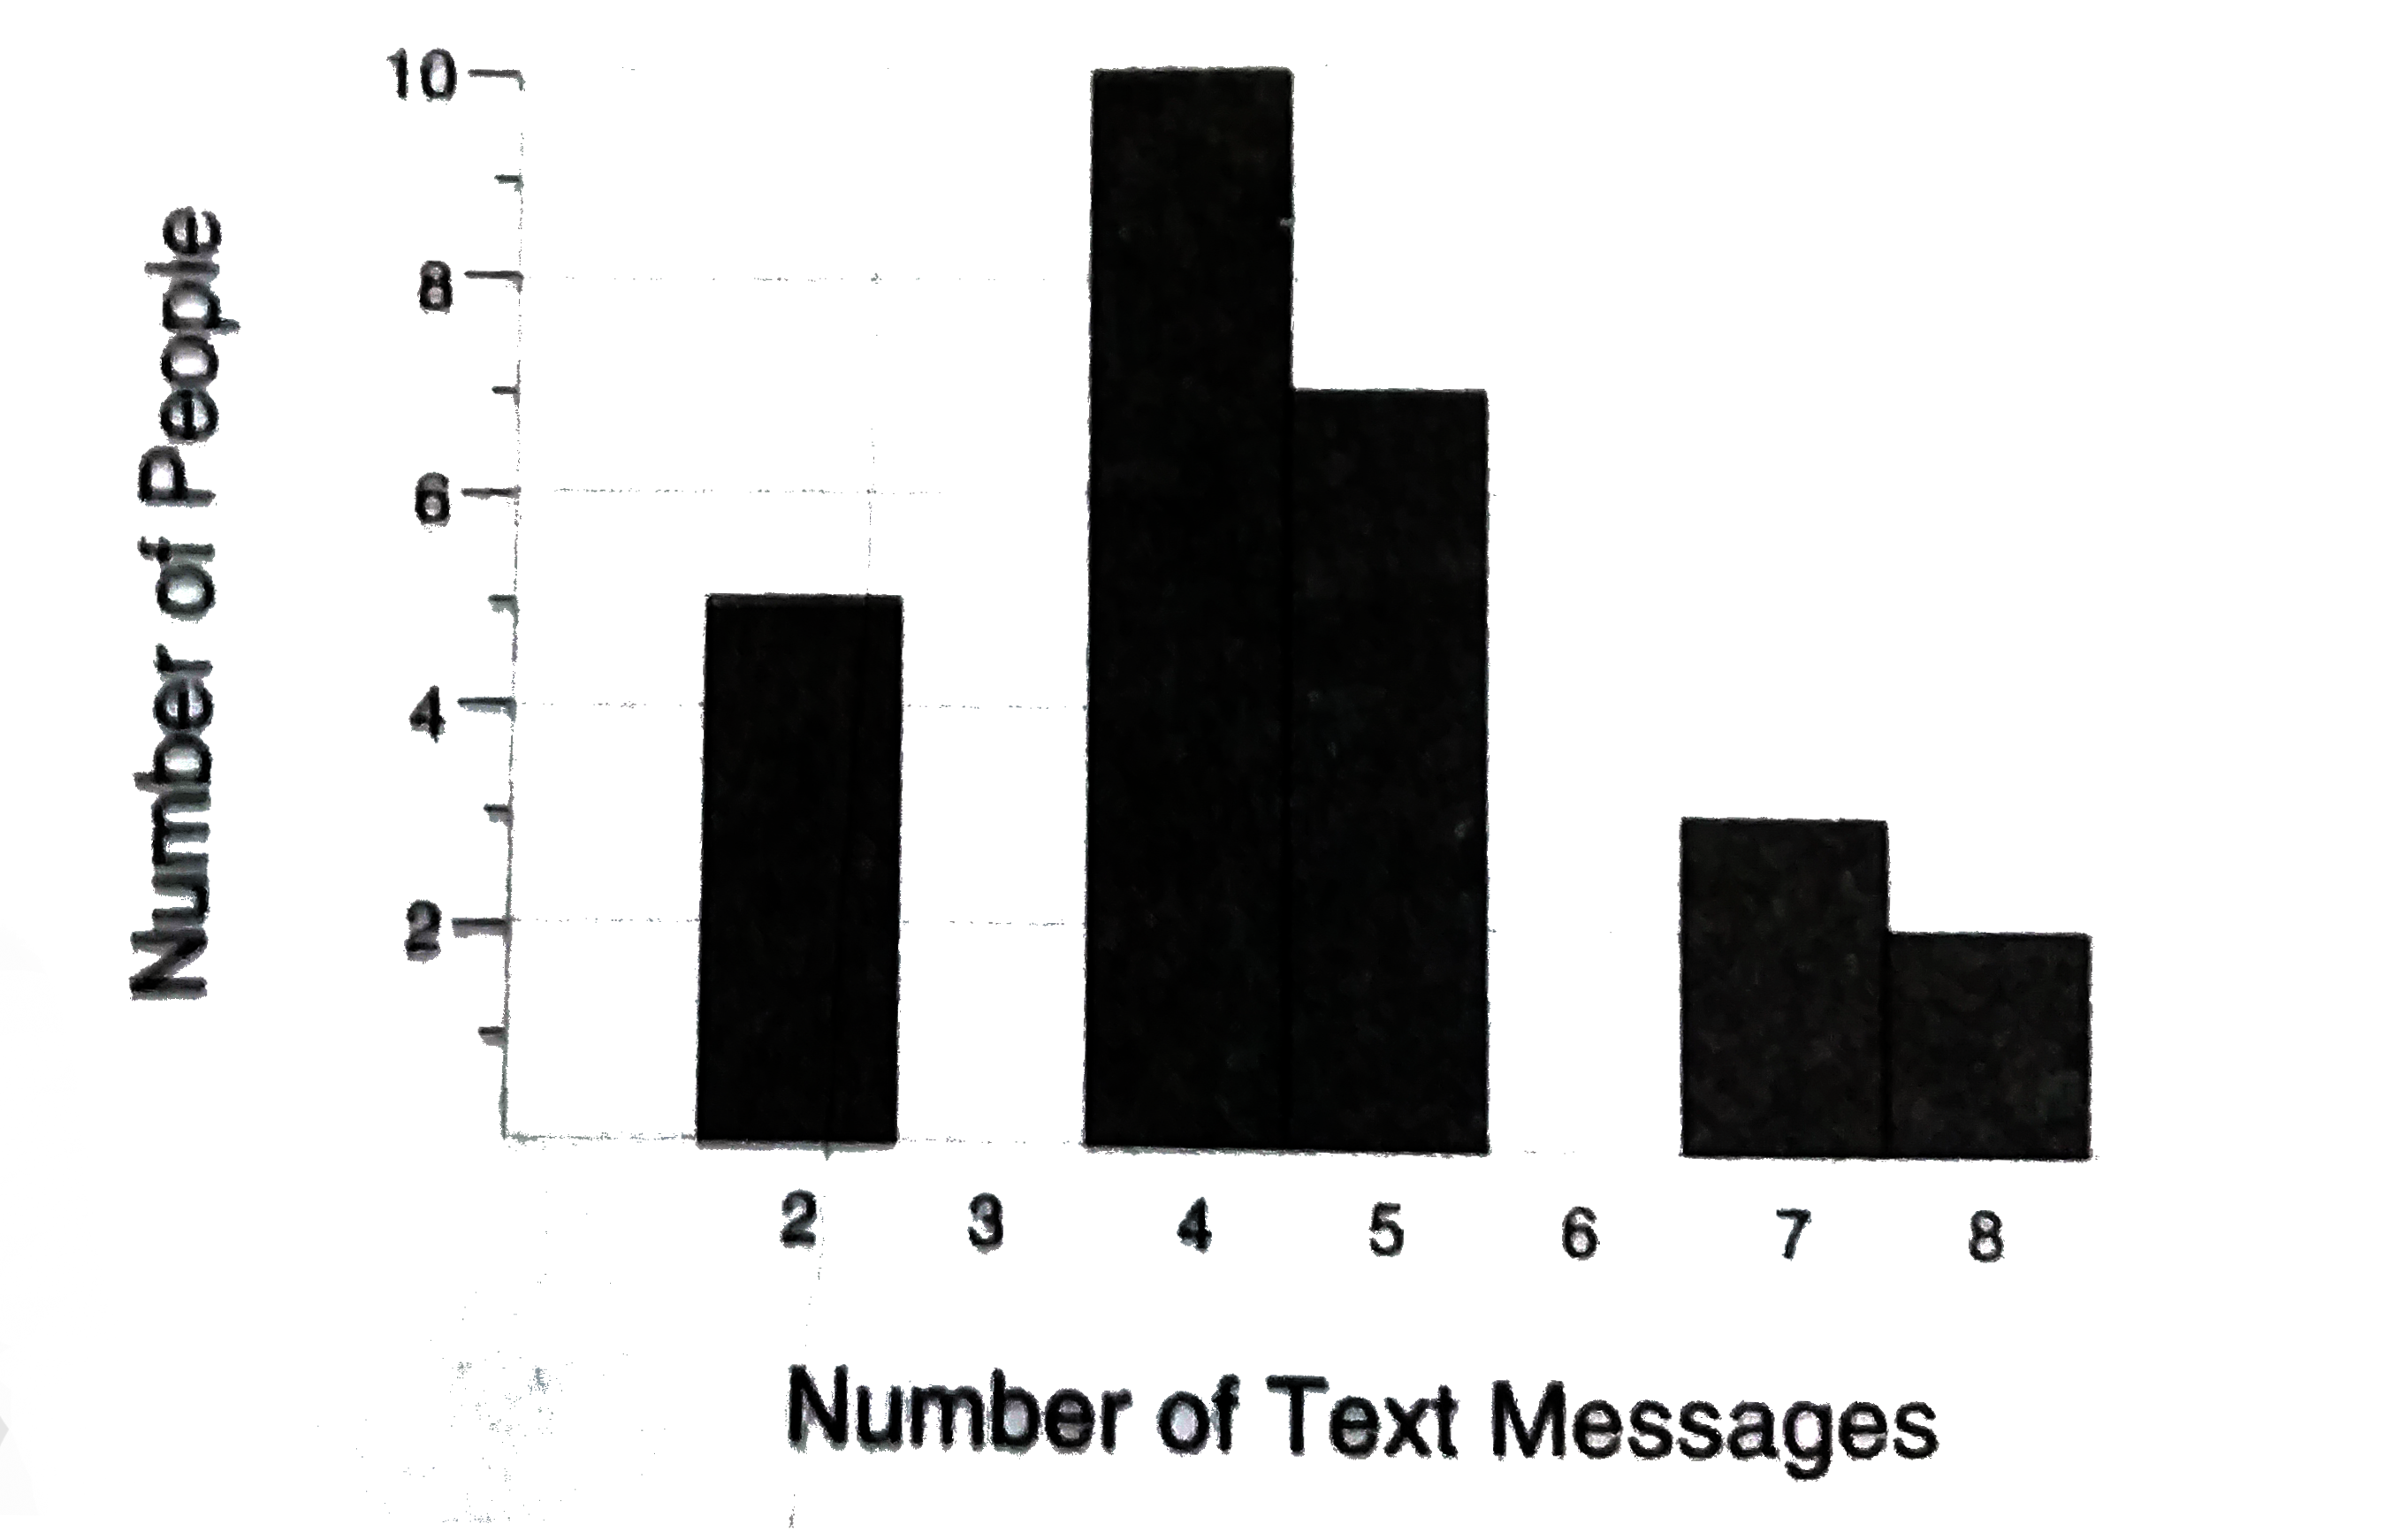 The histogram above shows the number of mobile text message sent by a randomly selected group of 27 people on a given day. The average number of text message sent per person is closest to what whole number?